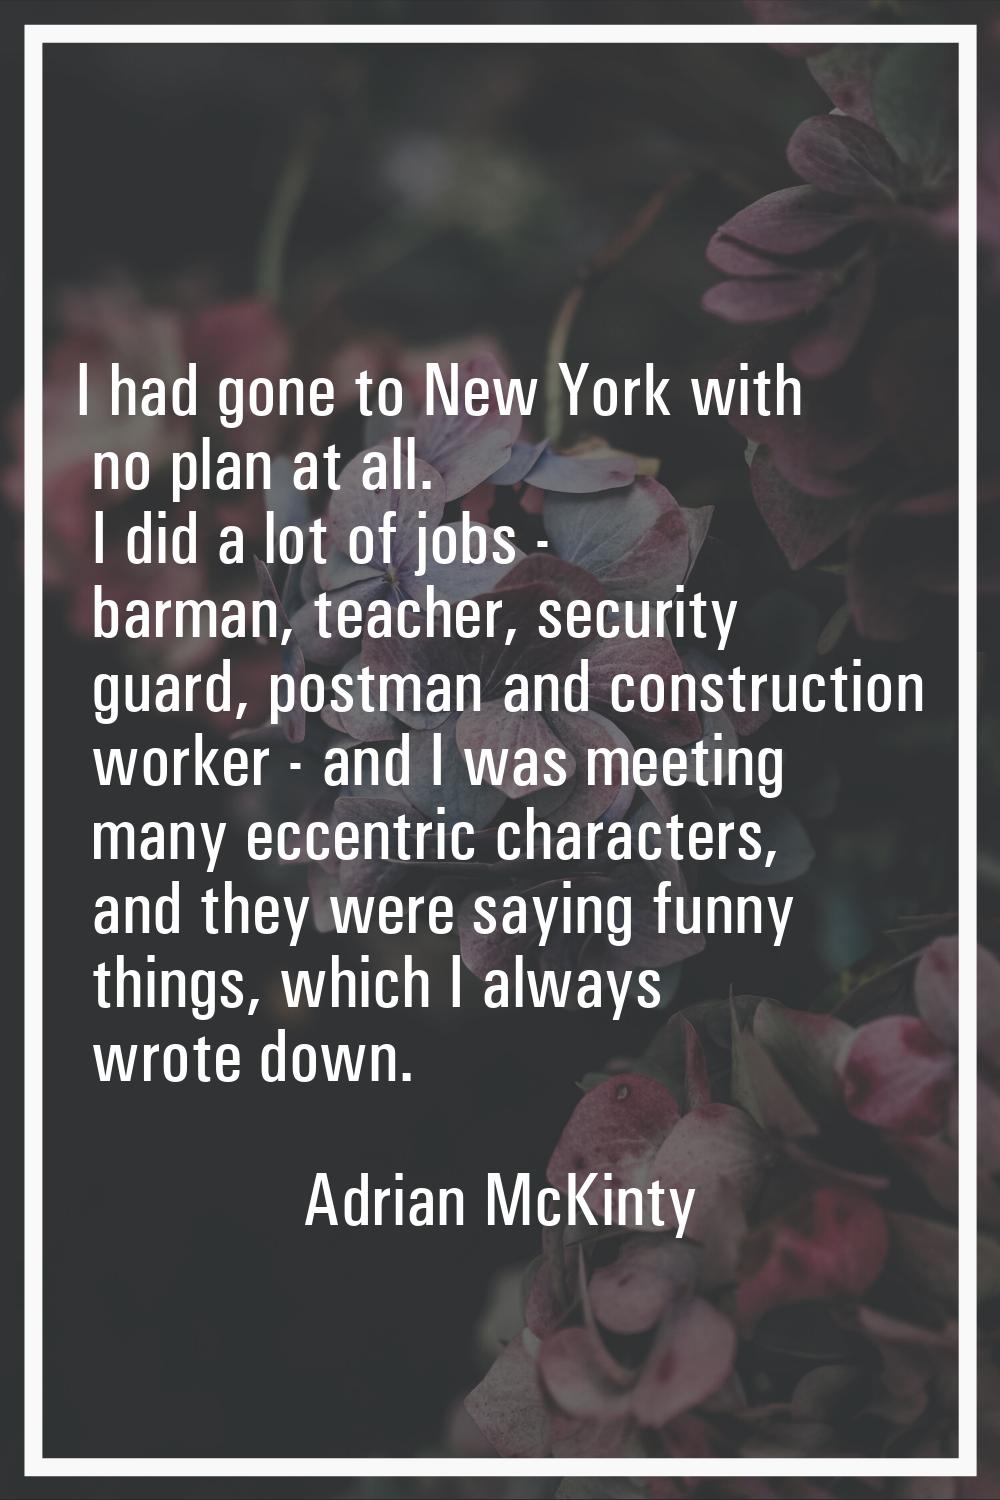 I had gone to New York with no plan at all. I did a lot of jobs - barman, teacher, security guard, 